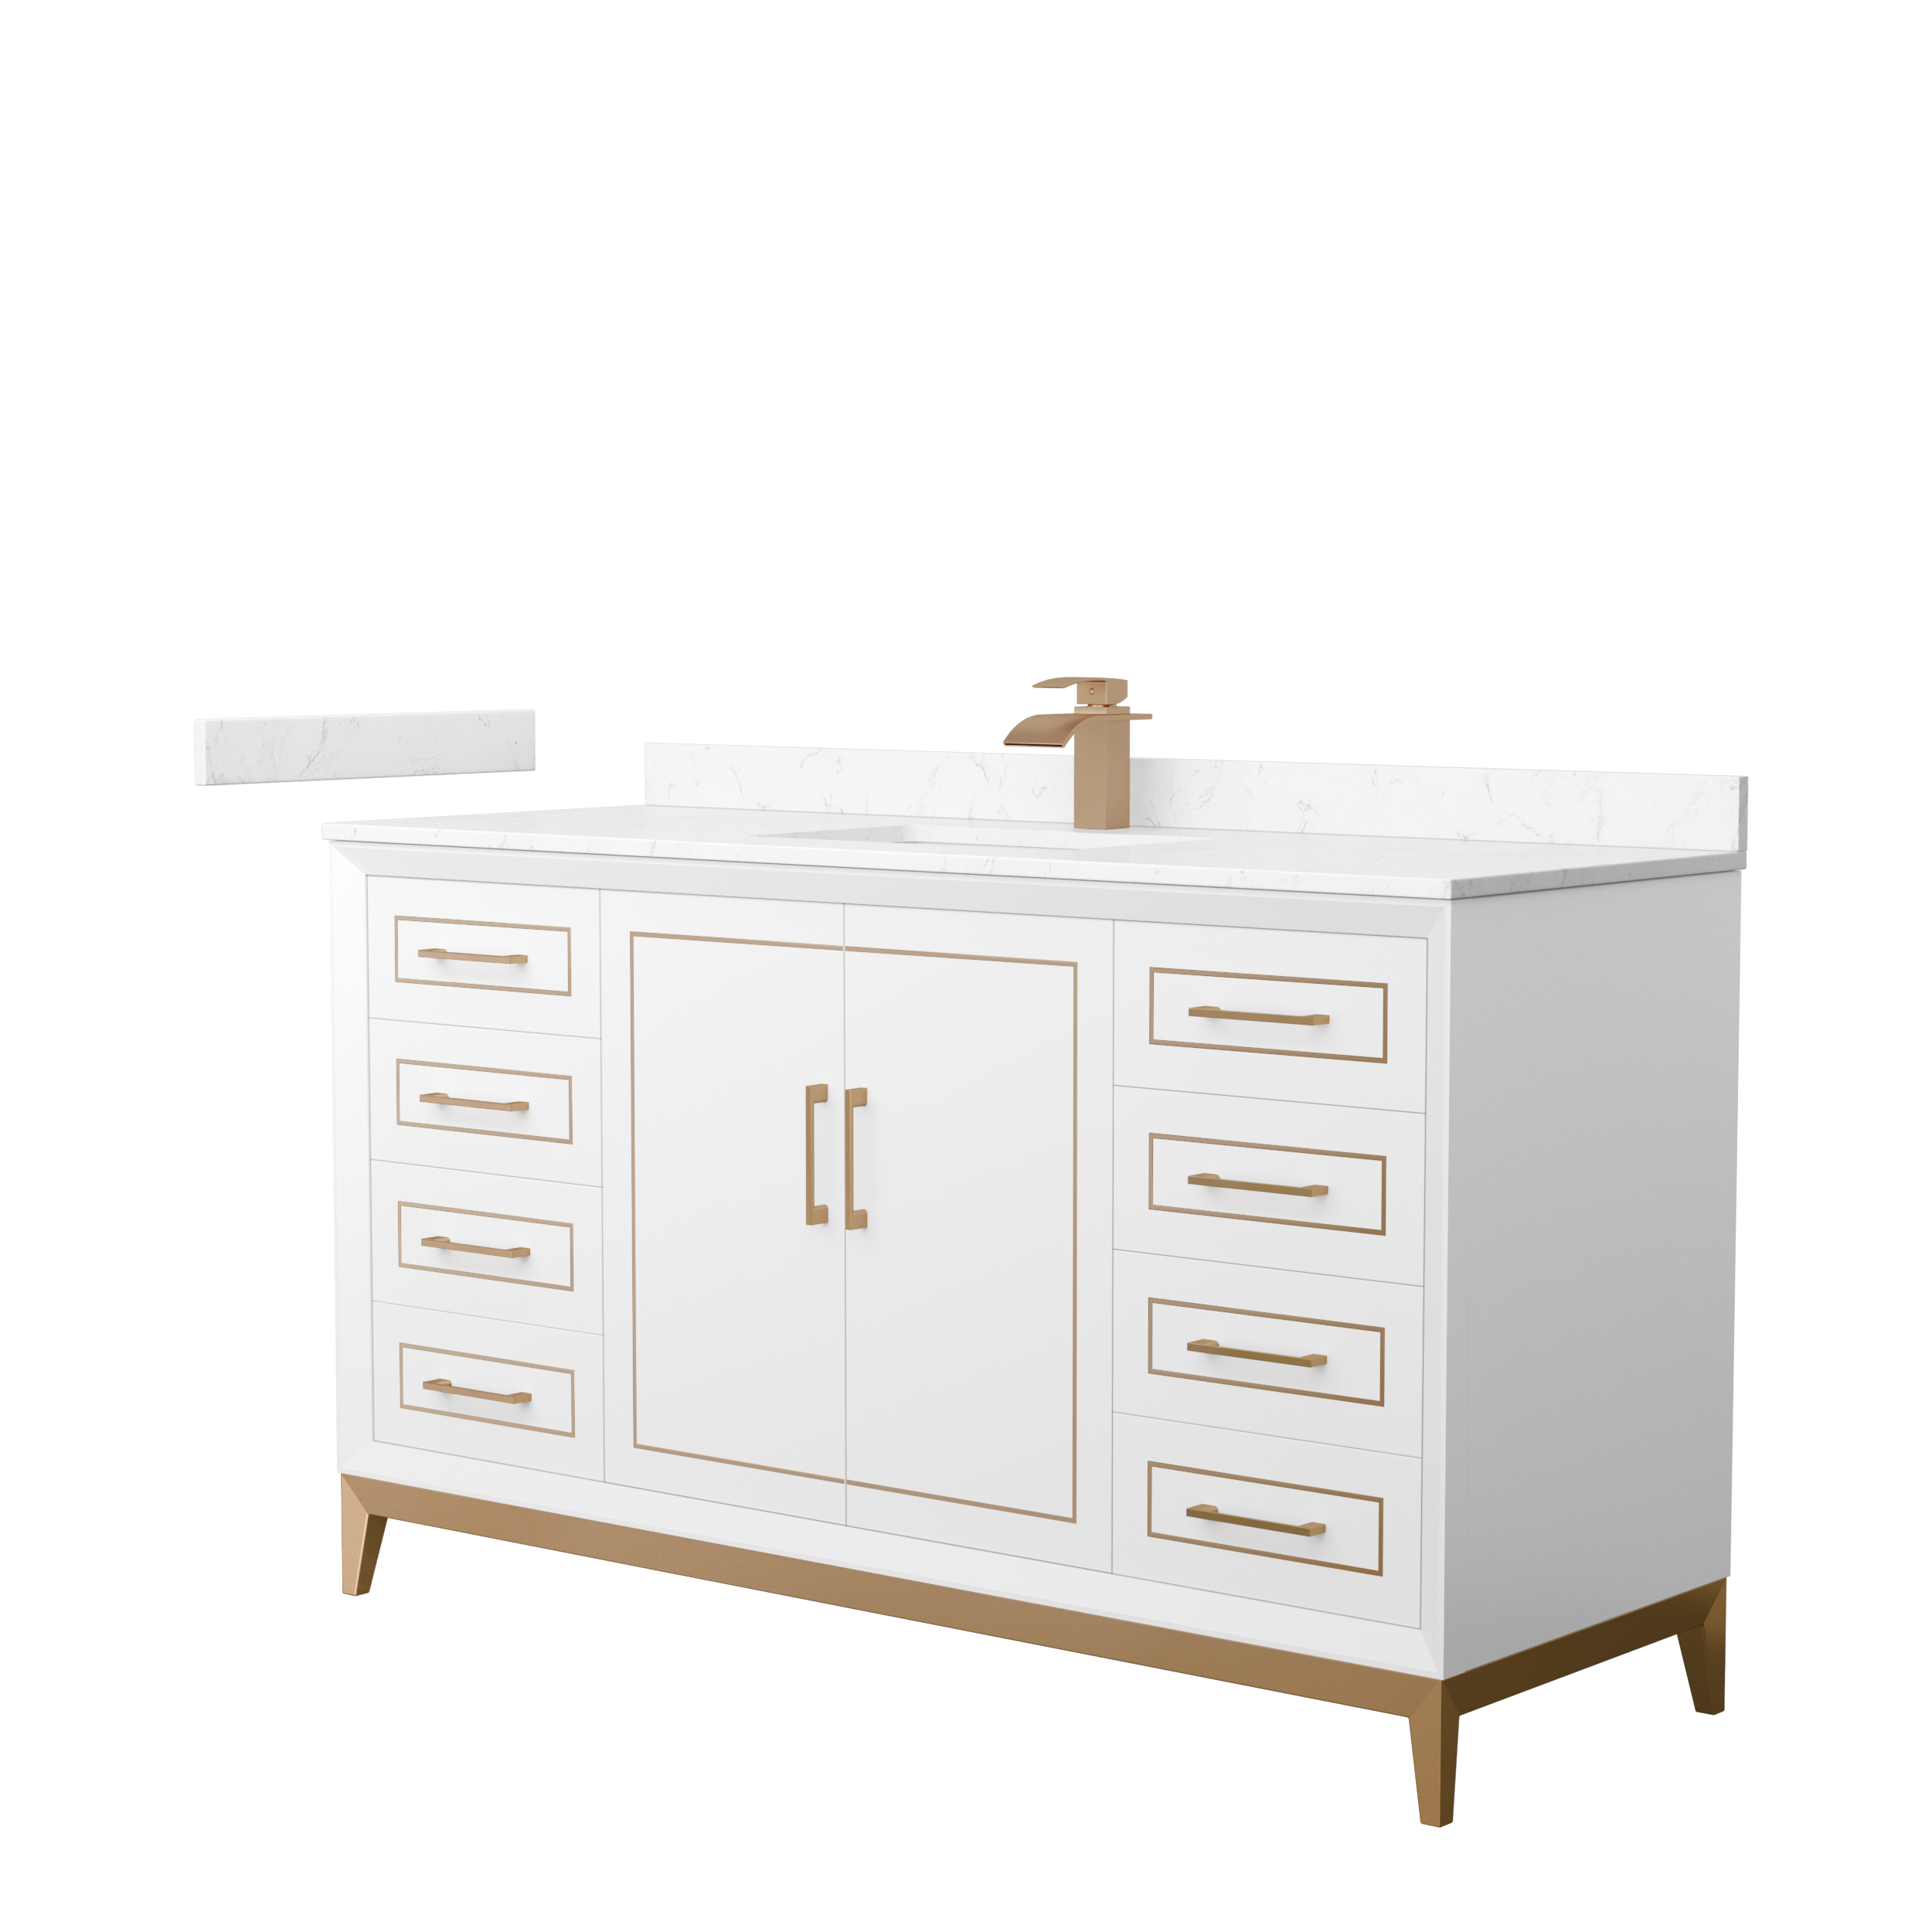 Marlena 60" Single Vanity with optional Cultured Marble Counter - White WC-5151-60-SGL-VAN-WHT-